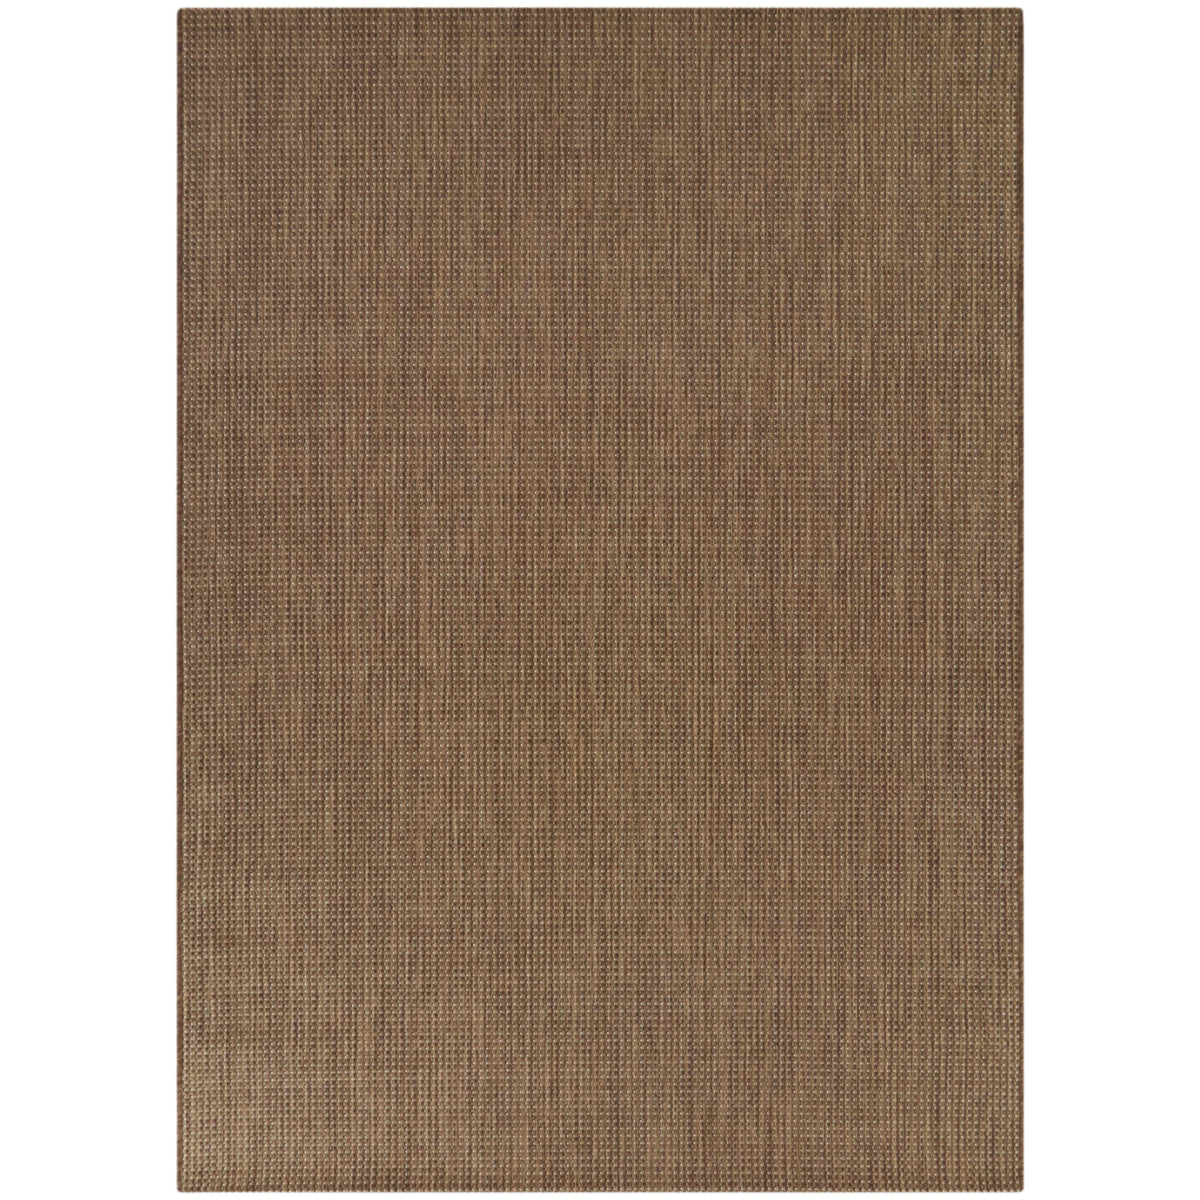 Kinnell Solid Patio Area Rug